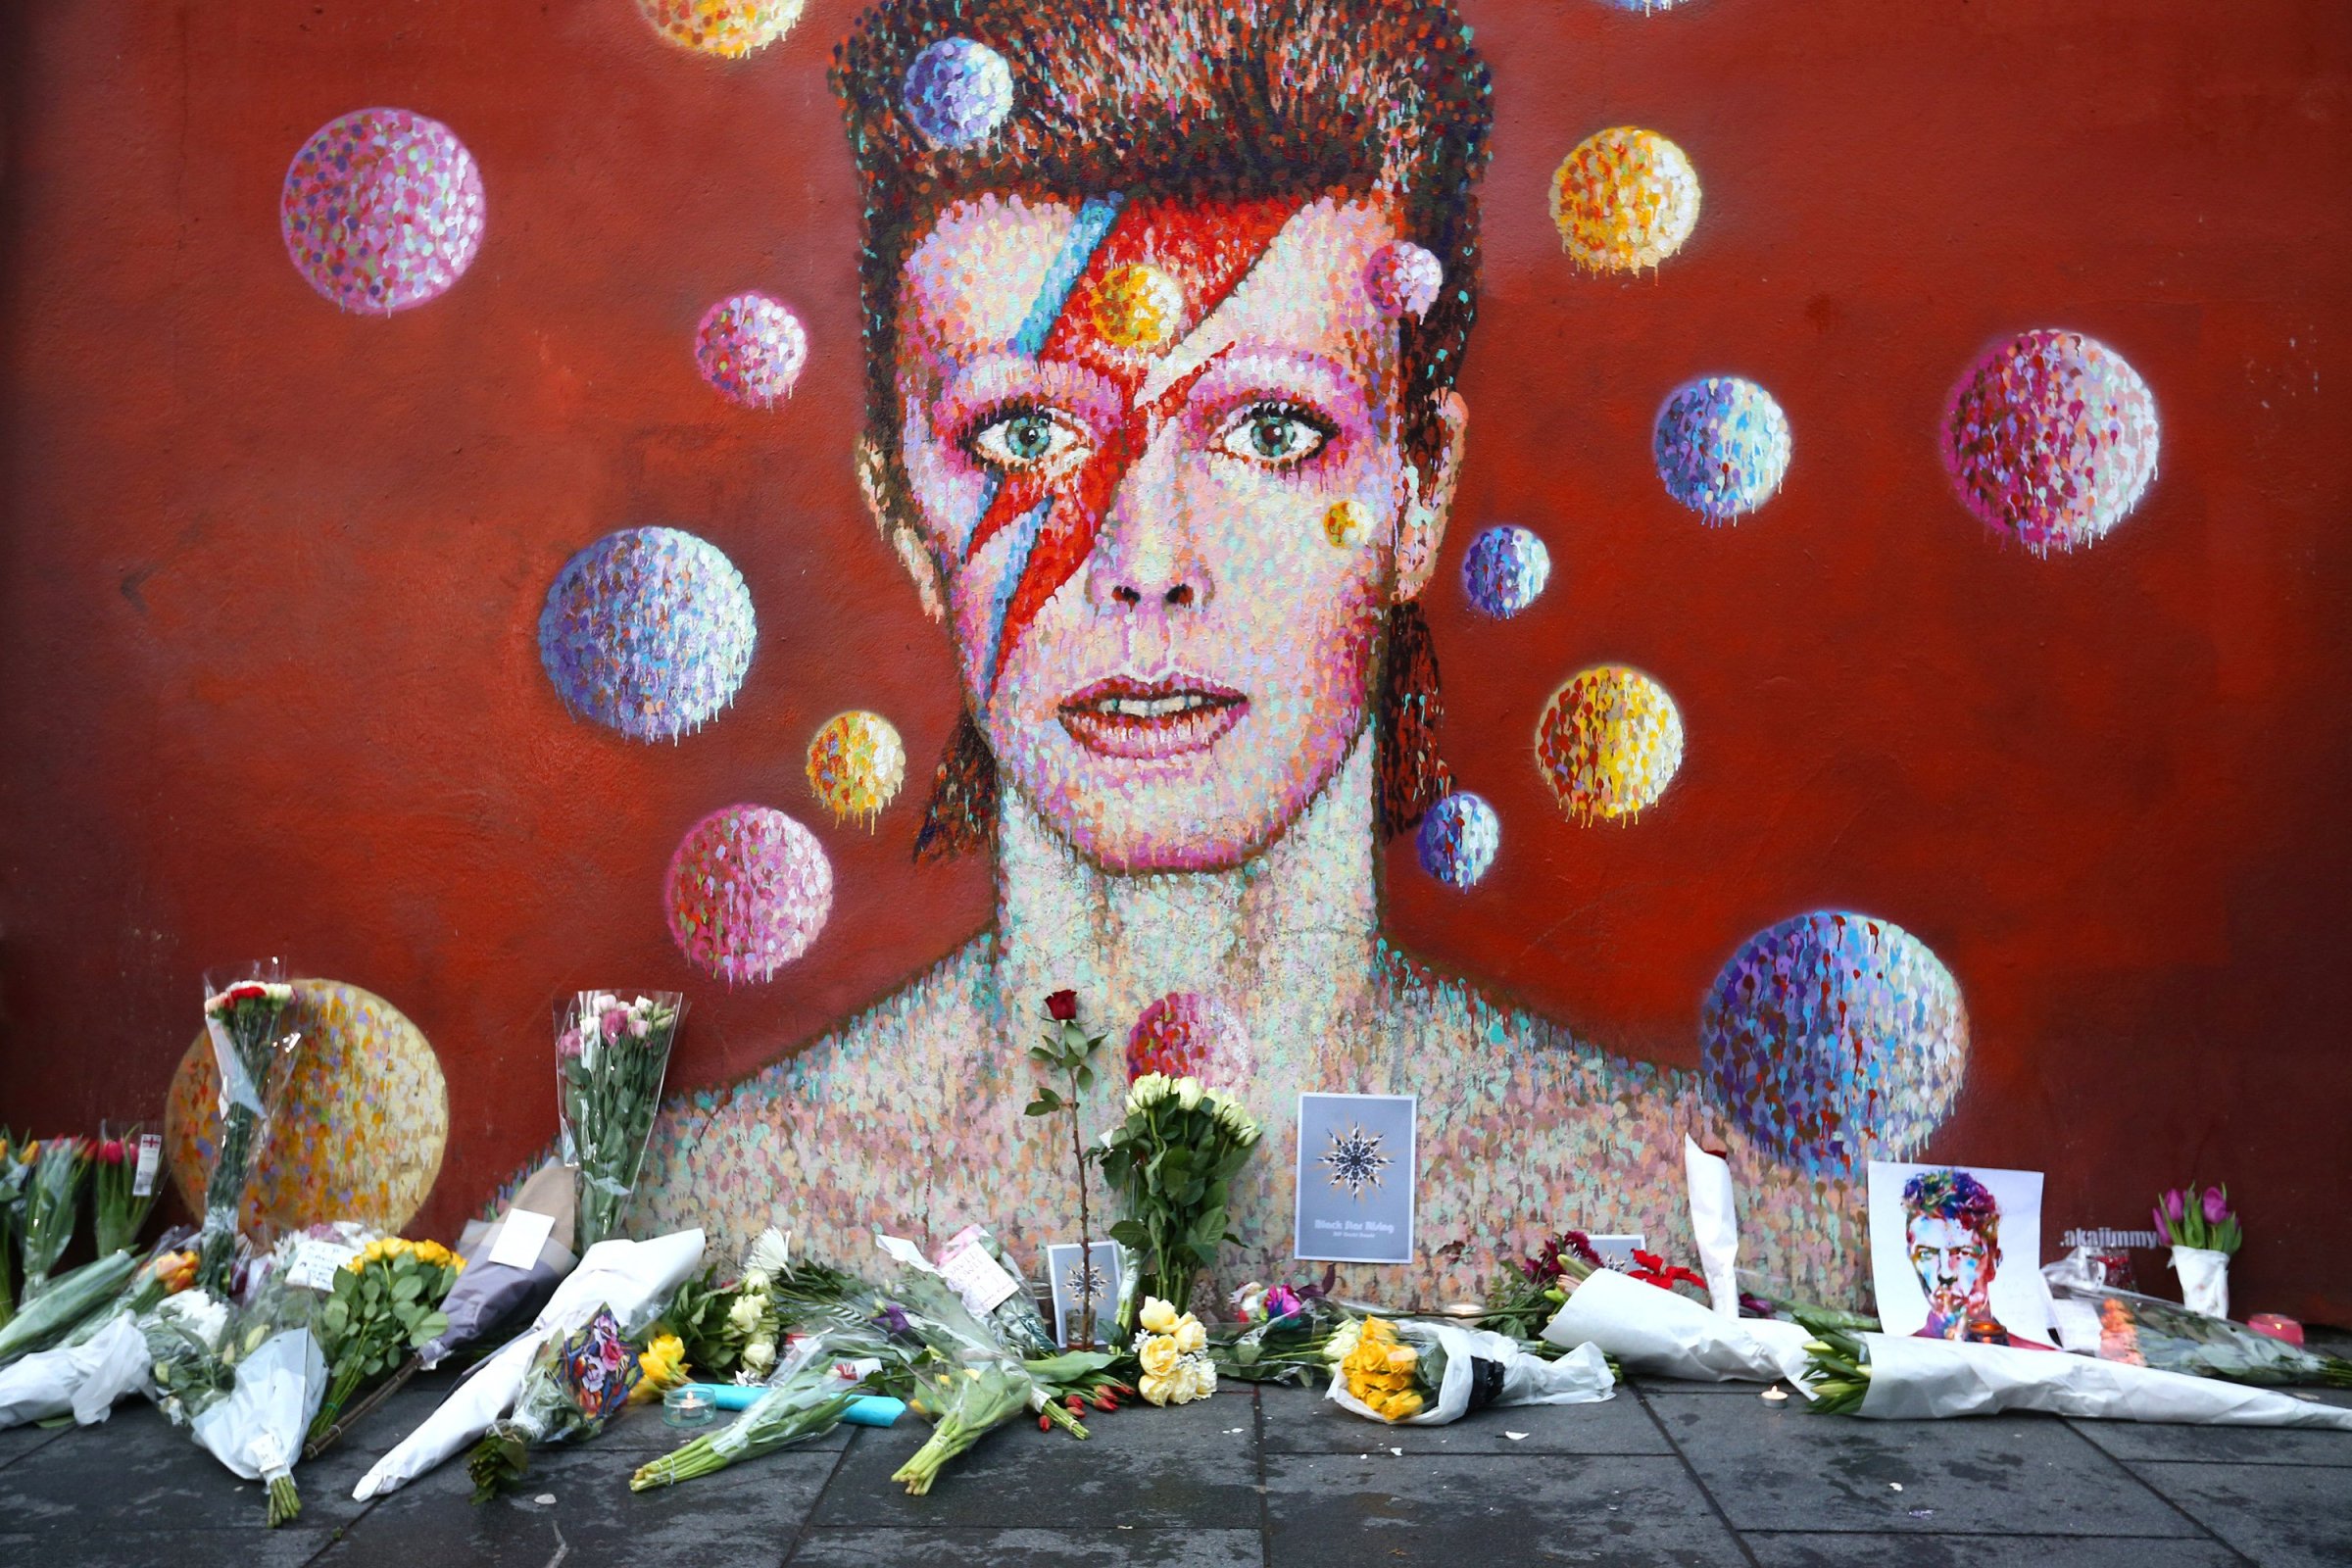 Flowers are laid beneath a mural of David Bowie in Brixton, England on Jan. 11, 2016. British music and fashion icon David Bowie died earlier today at the age of 69 after a battle with cancer.